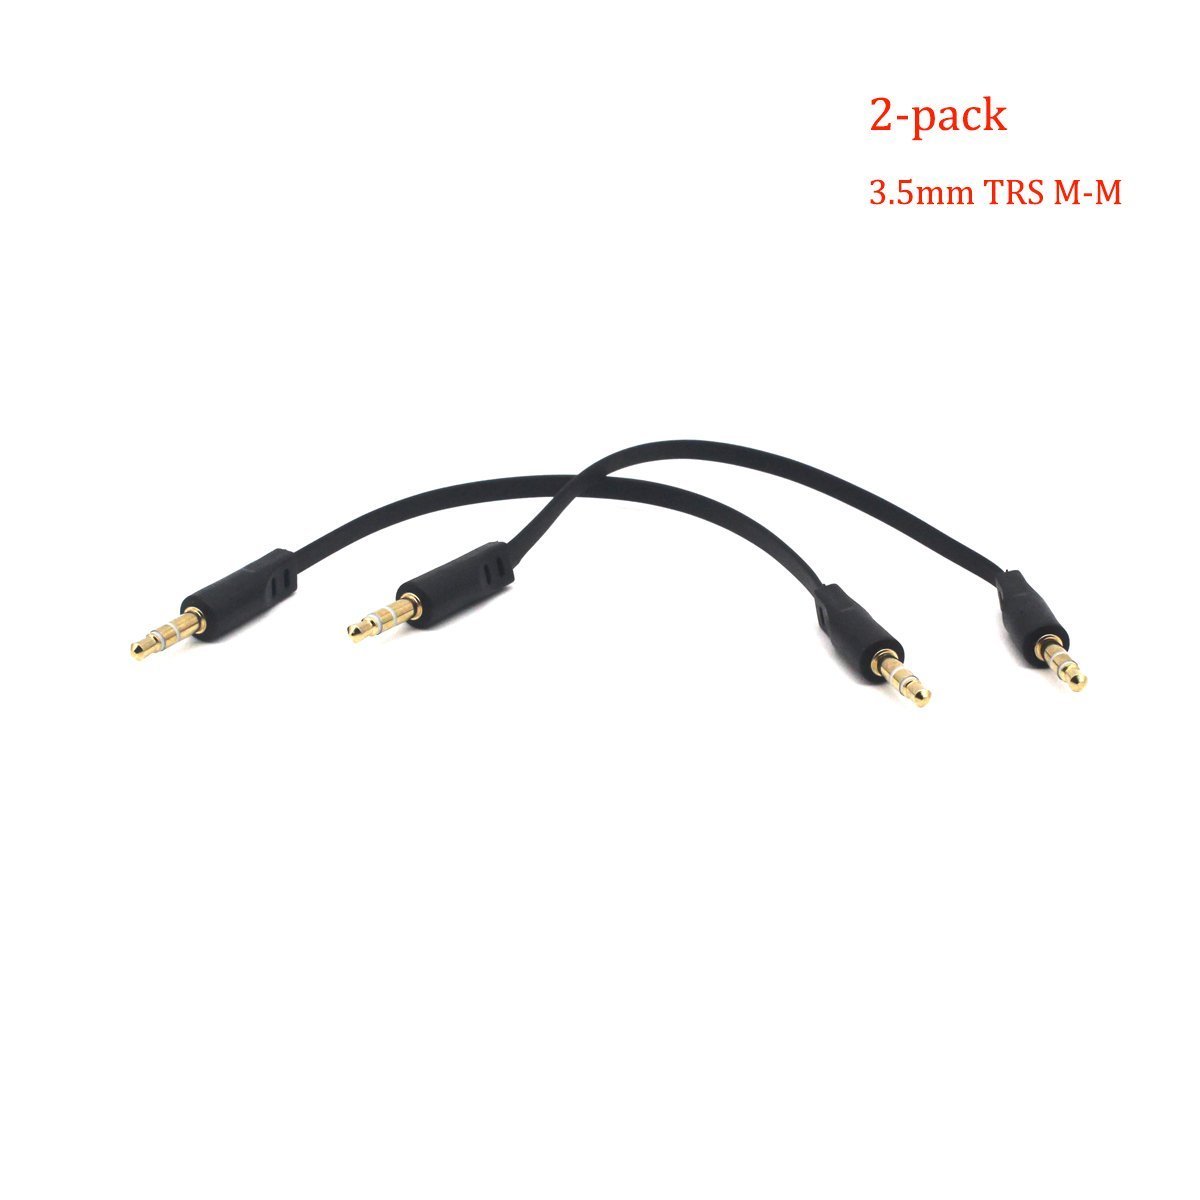 Kework 3.5mm Audio Cable, 2-Pack 15cm 1/8" 3.5mm TRS Male to TRS Male Stereo Jack Audio Cable AUX Cord for Headphone, Car Stereo, Home Stereo and More (Straight Plug)